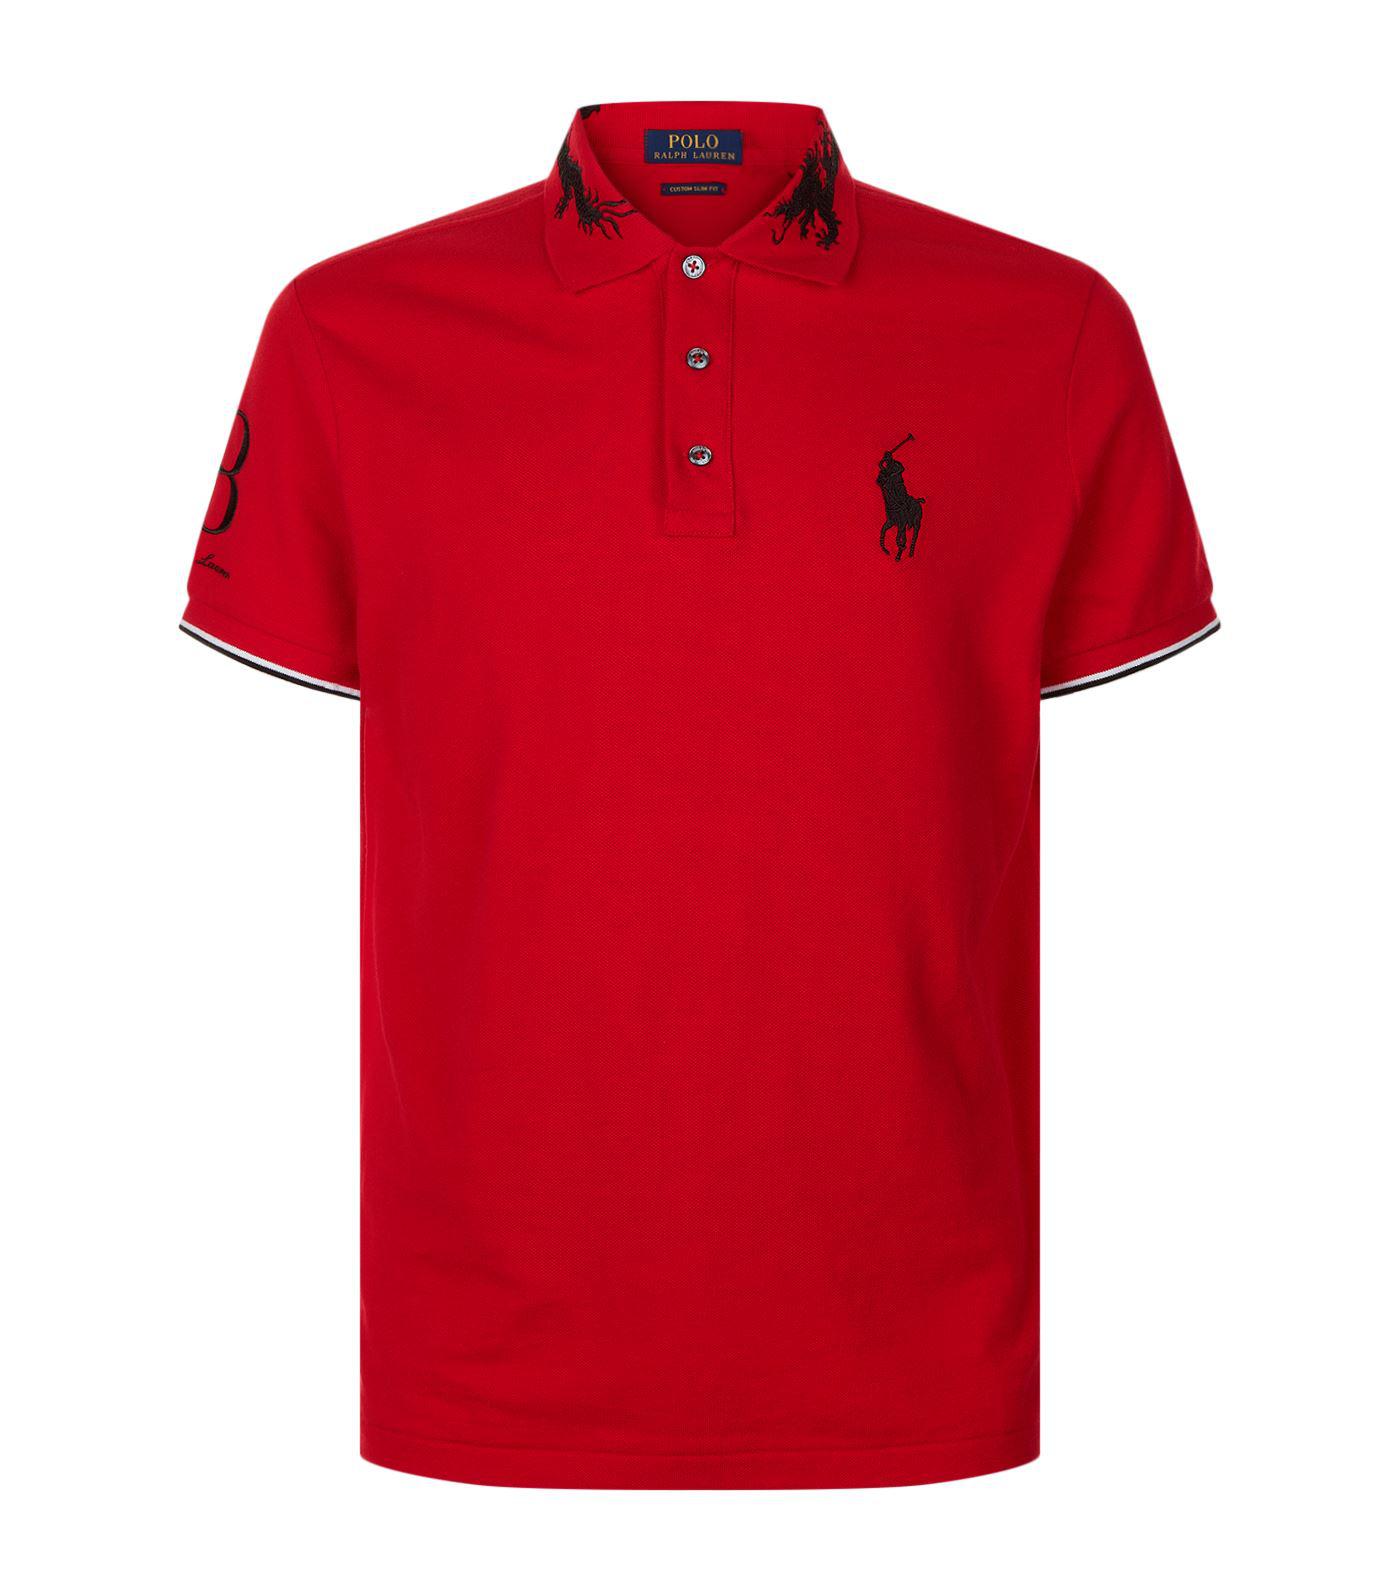 Polo Ralph Lauren Cotton Dragon Embroidered Polo Neck Top for Men - Lyst